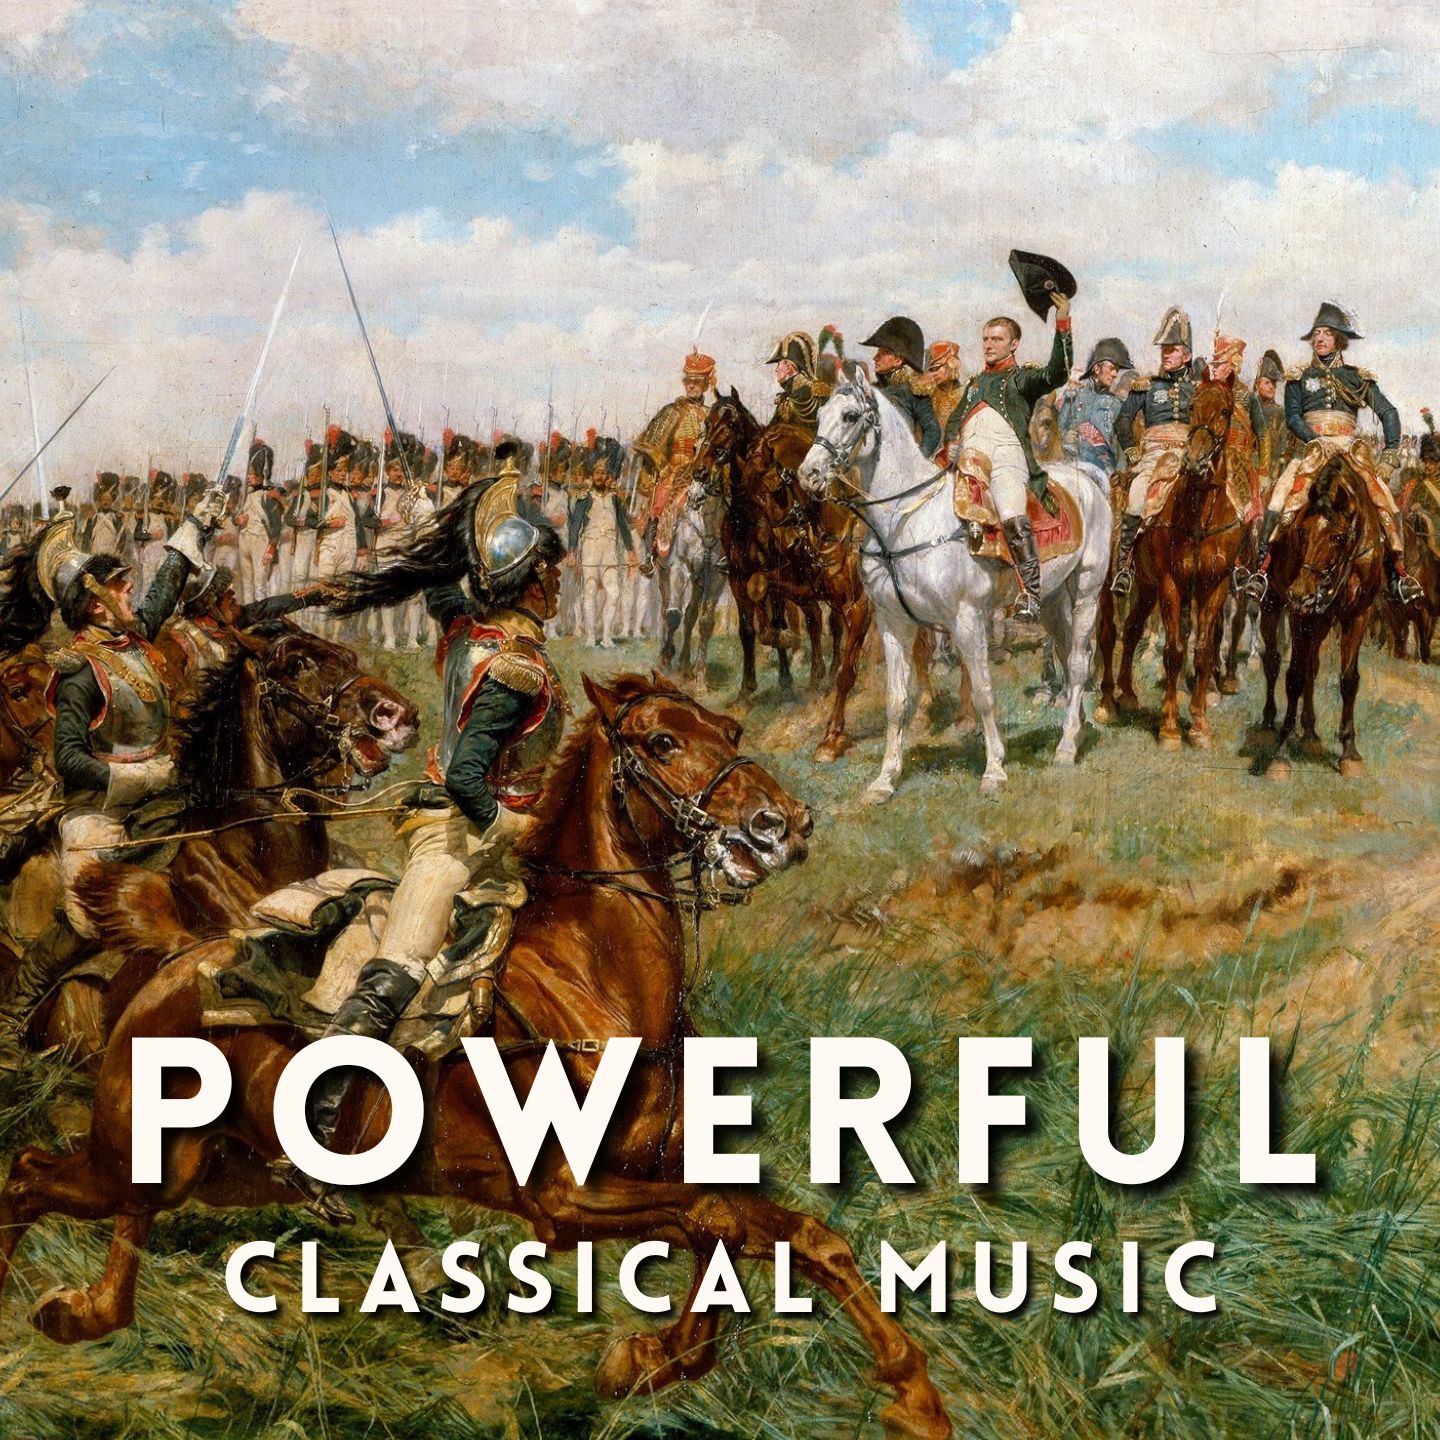 Classical Music that Makes You Feel POWERFUL